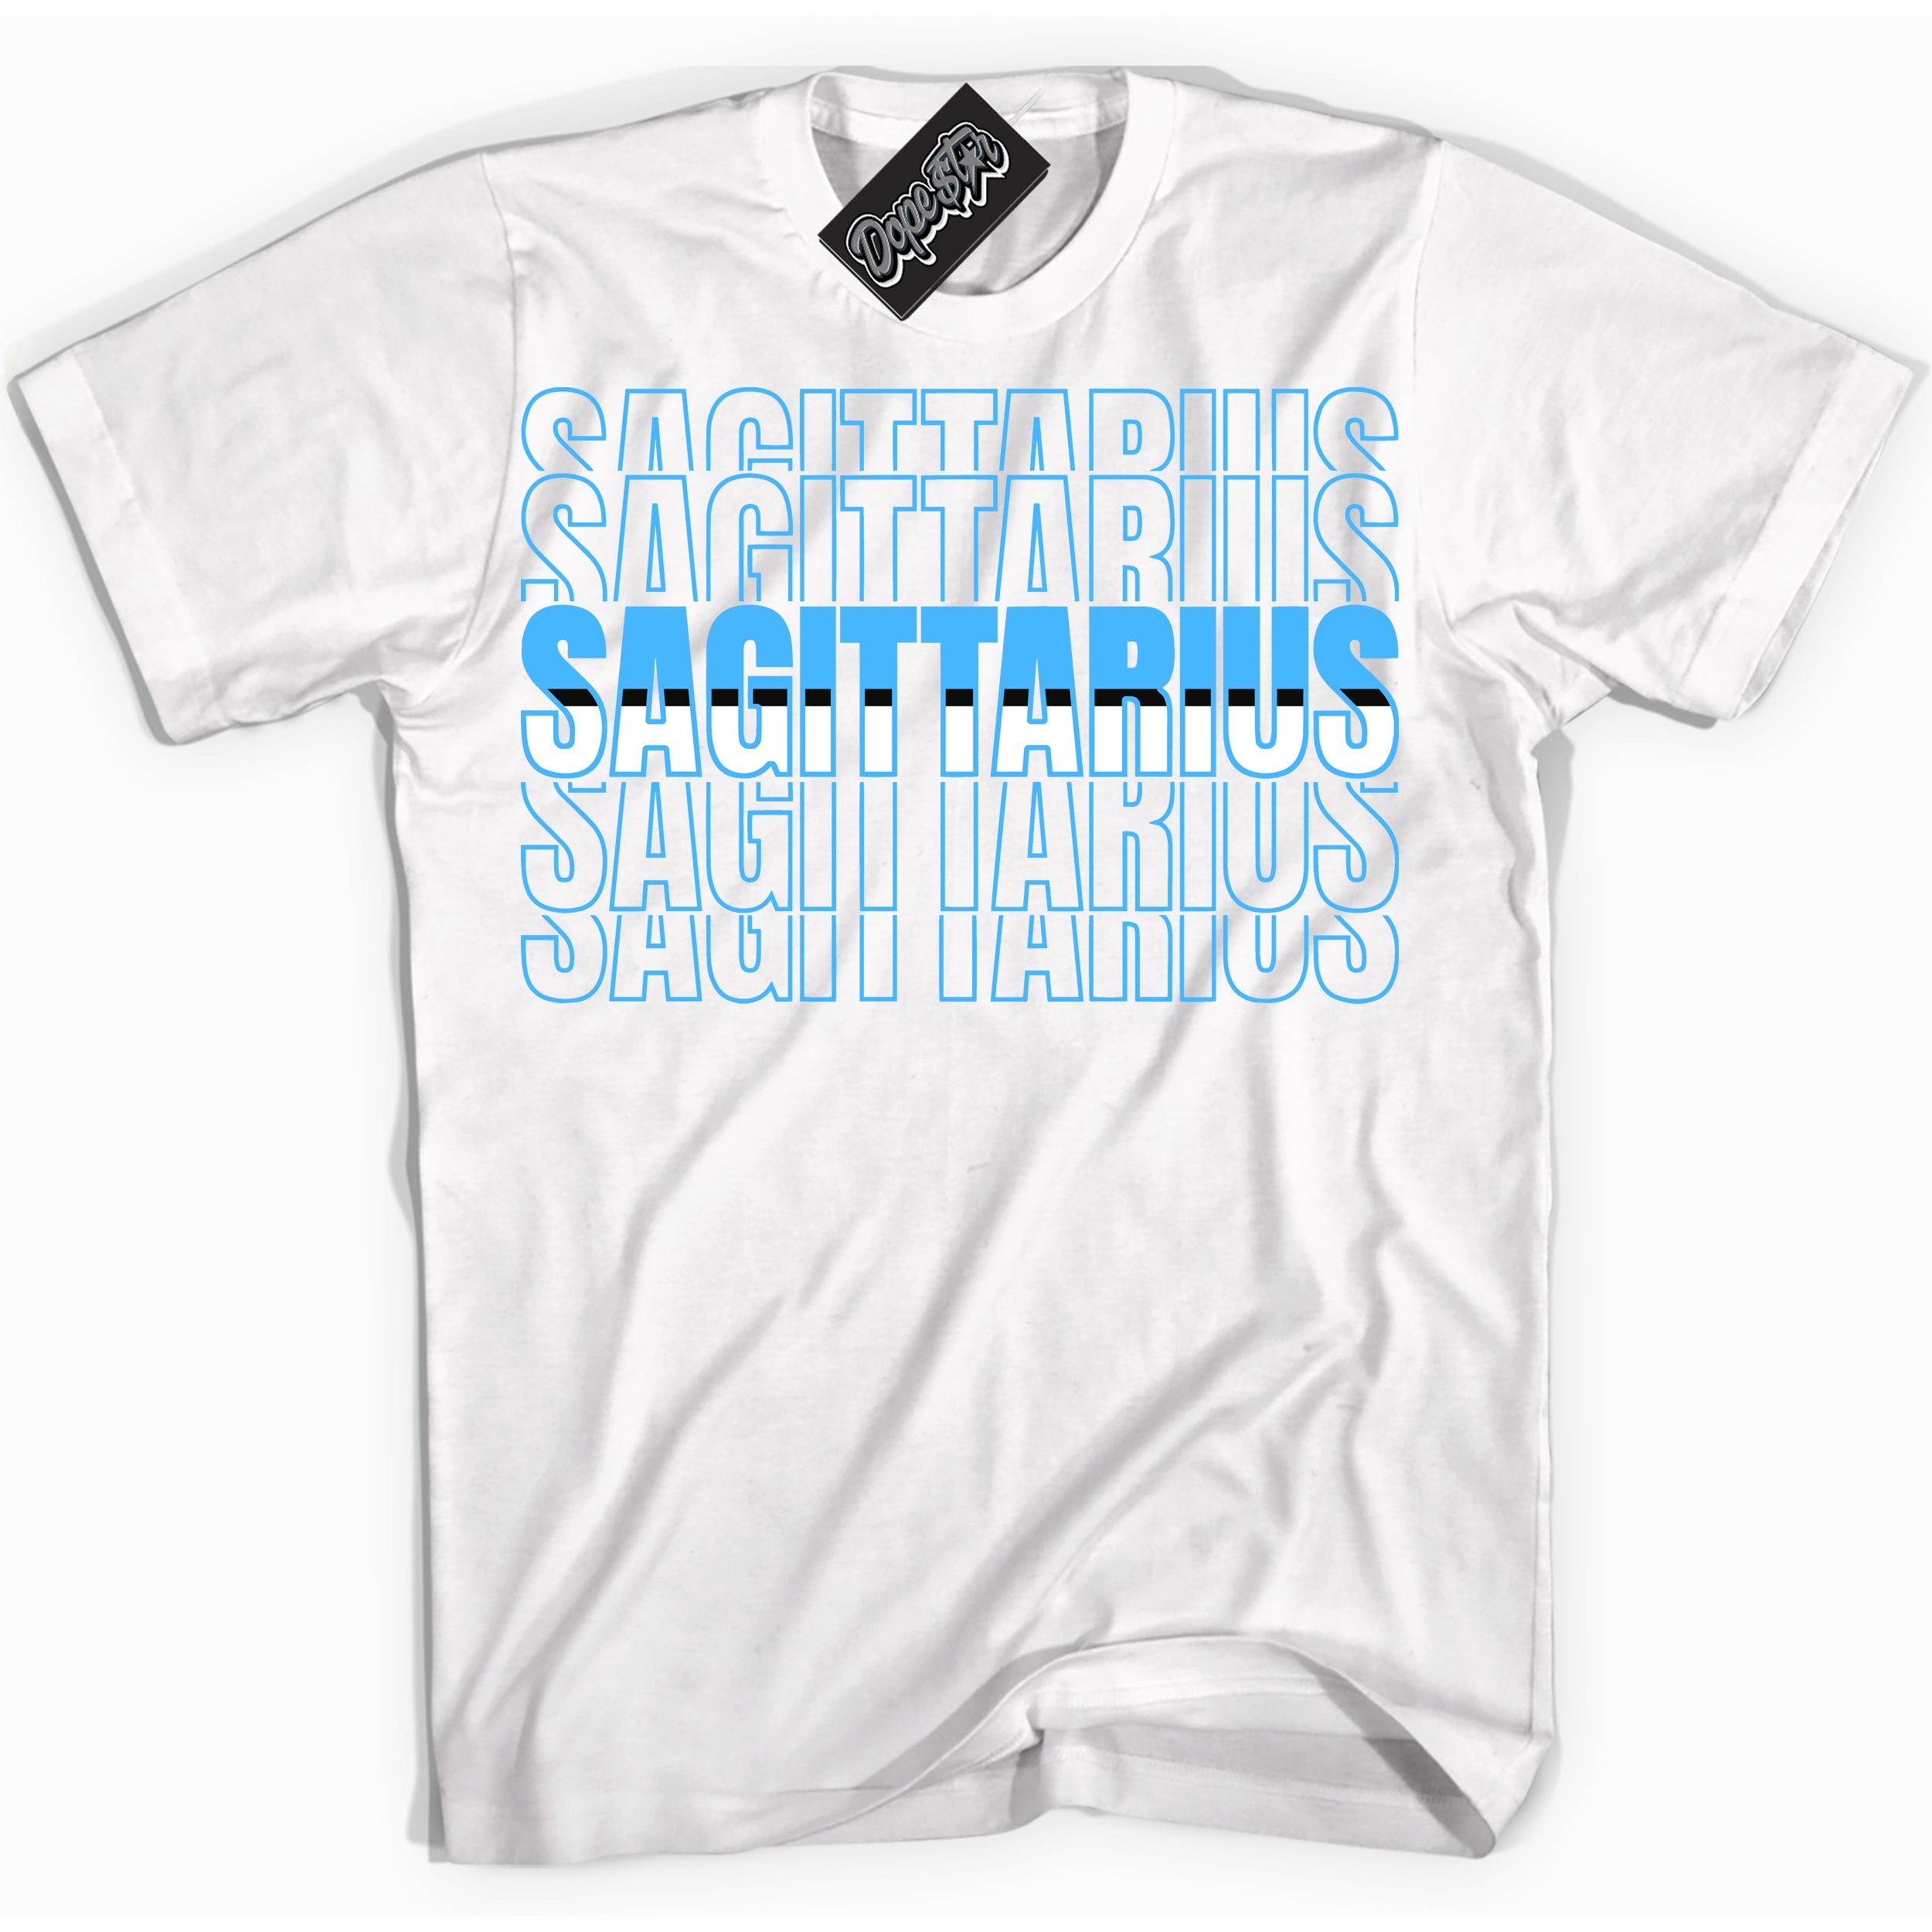 Cool White graphic tee with “ Sagittarius” design, that perfectly matches Powder Blue 9s sneakers 